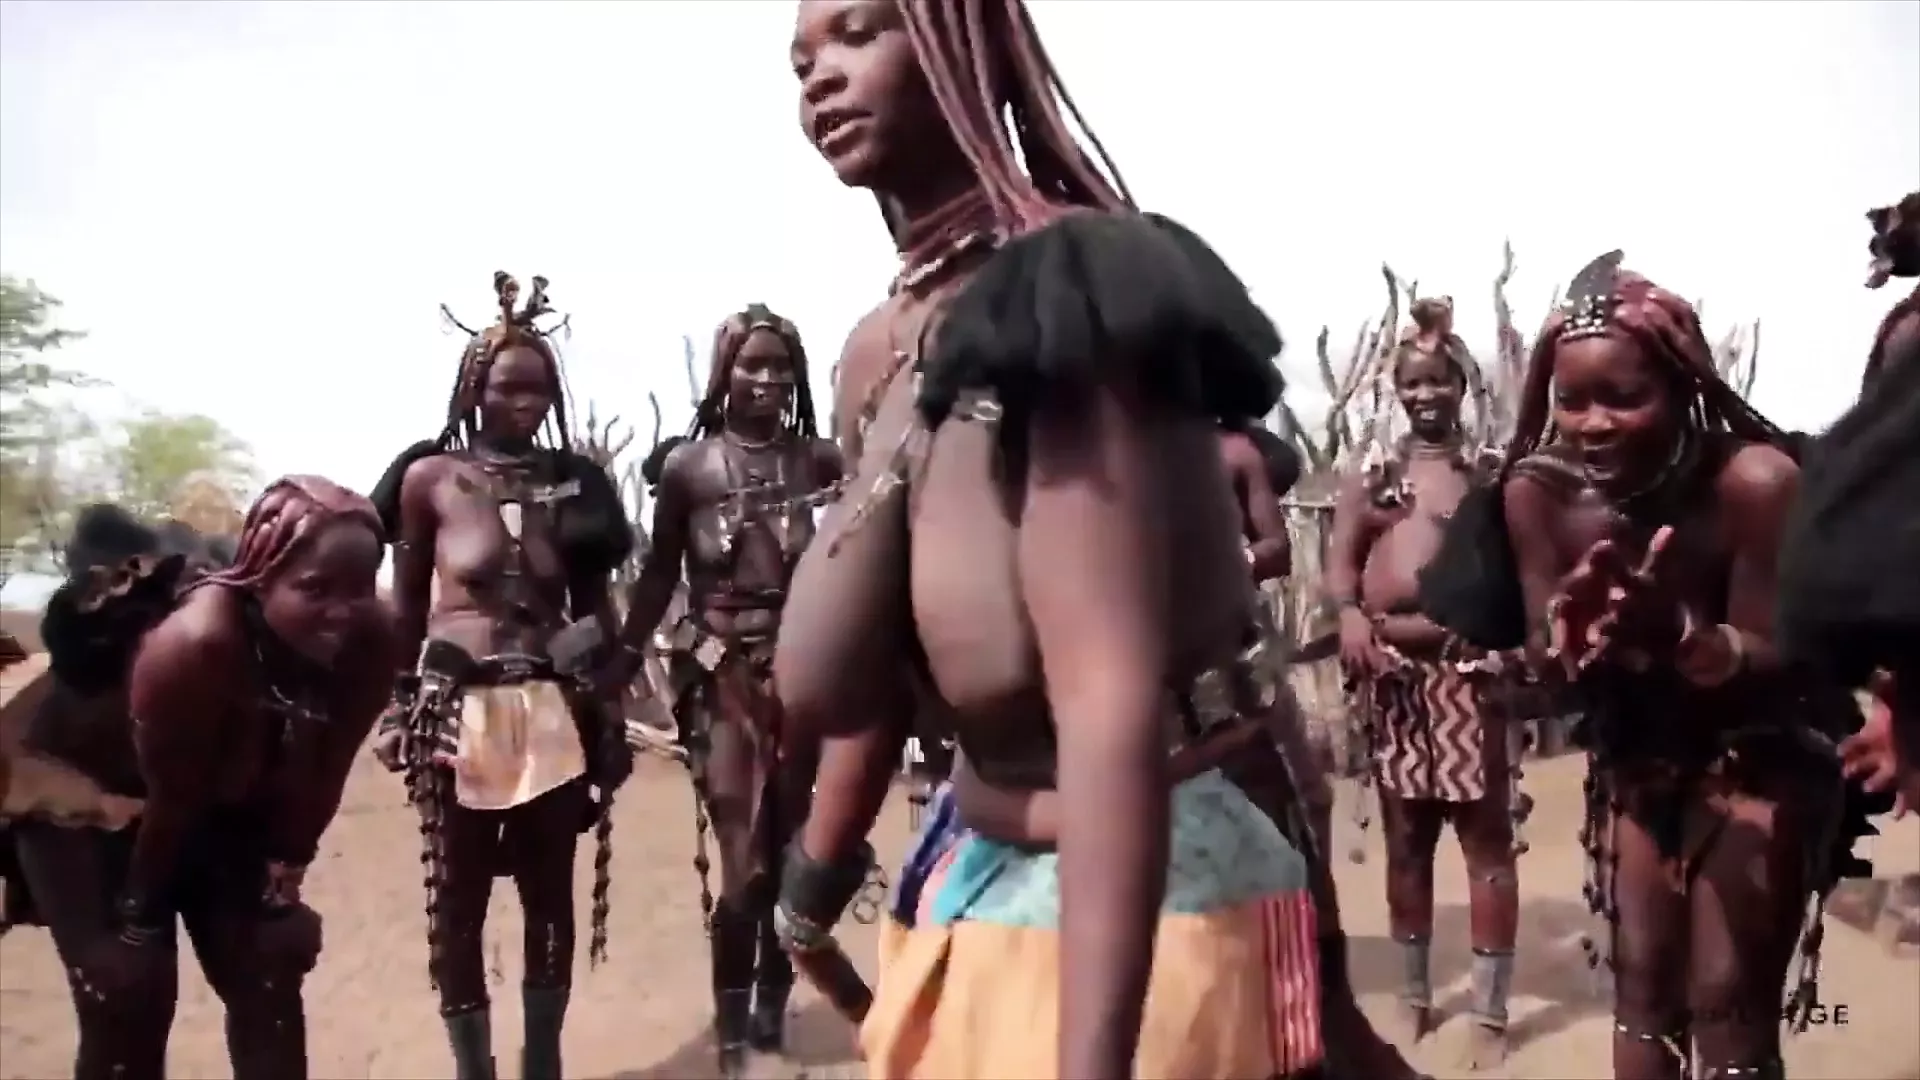 African Adivasi Sex - African Himba women dance and swing their saggy tits around | xHamster